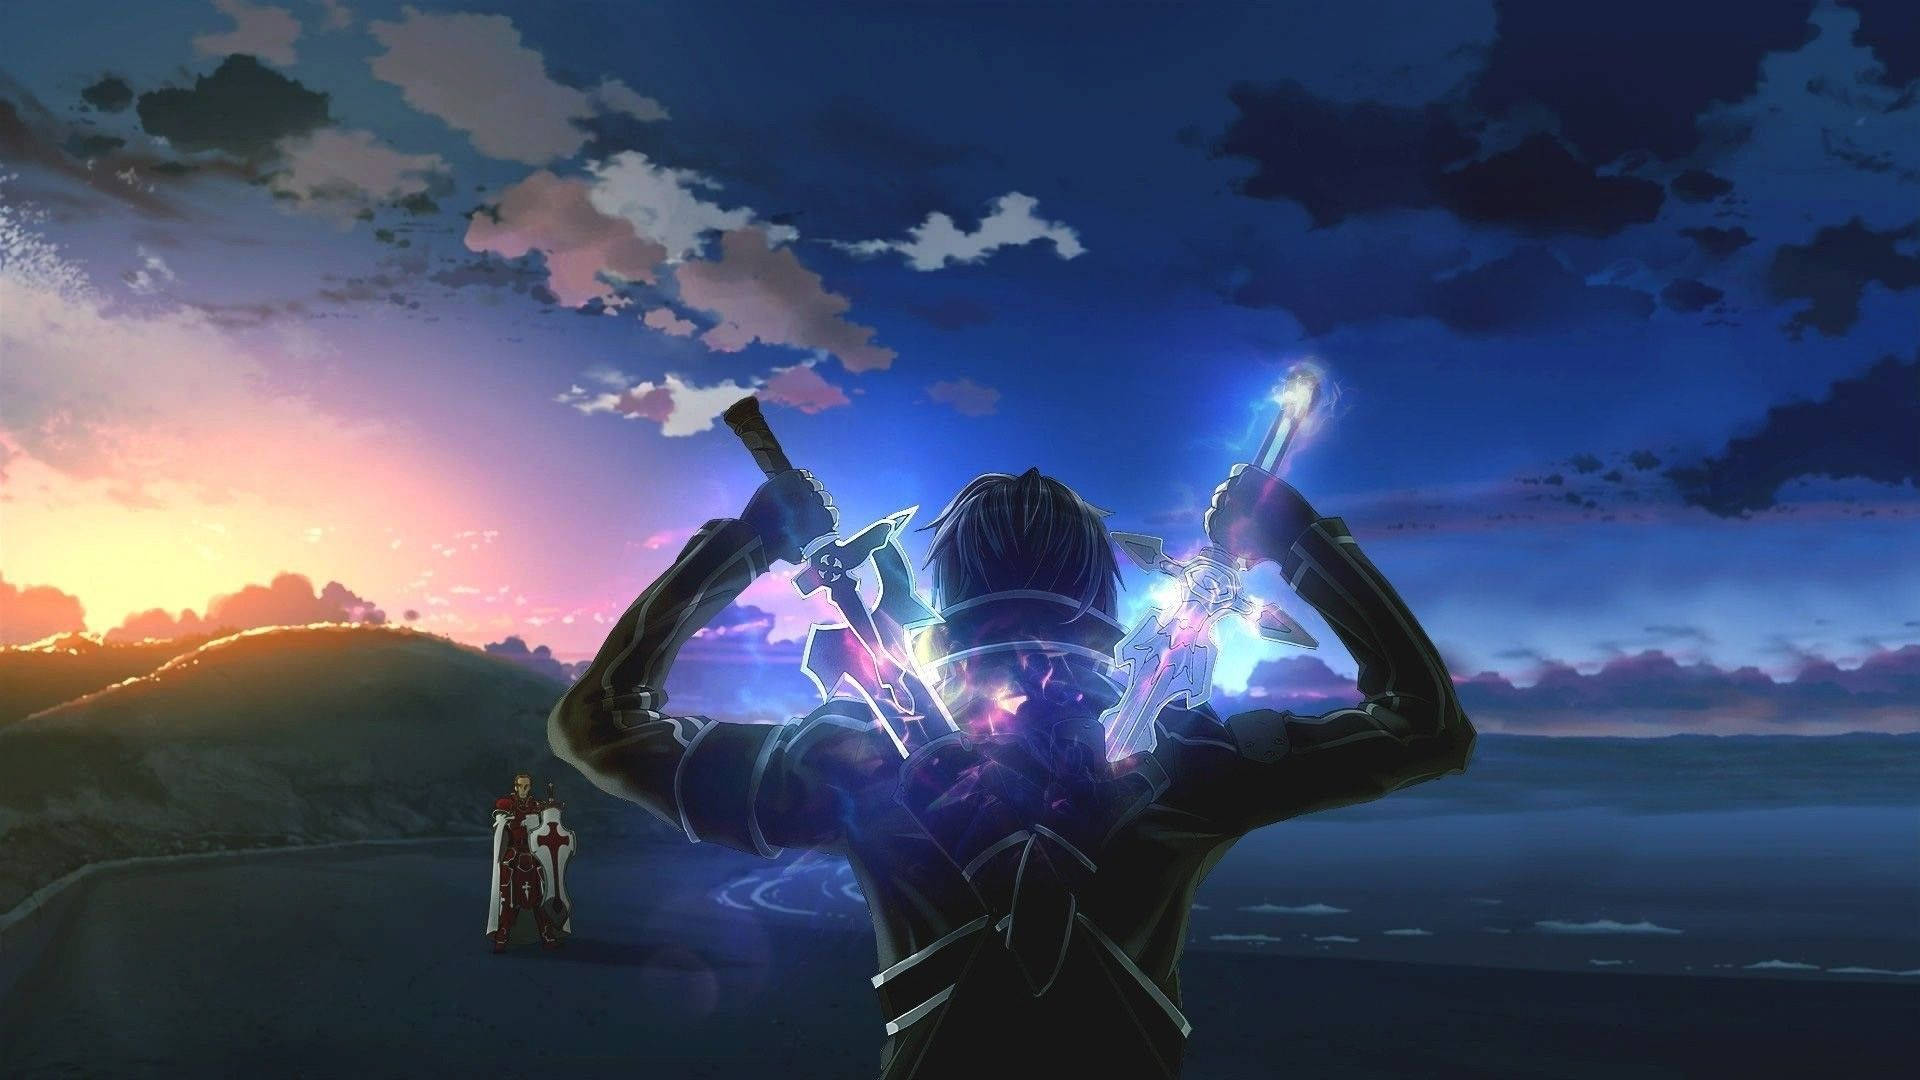 Kirito and Heathcliff duelling on a foggy beach in the MMORPG Sword Art Online Wallpaper